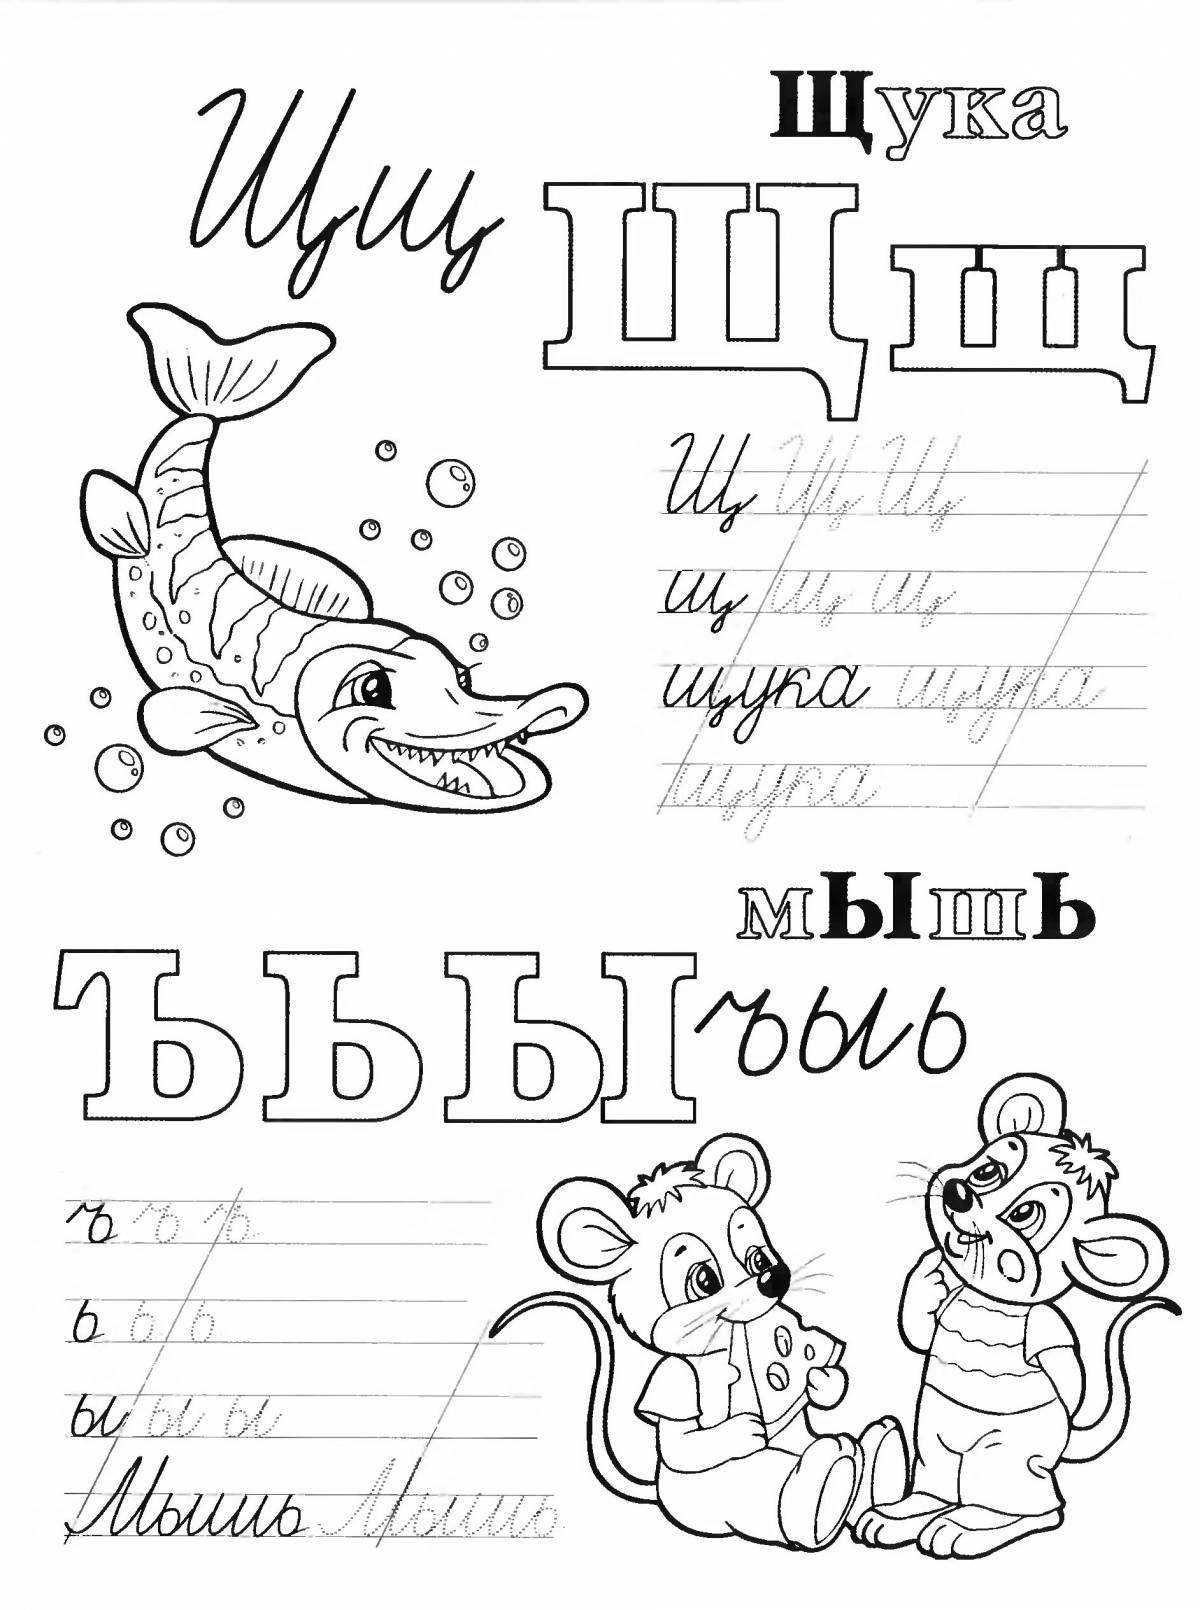 Coloring page gorgeous letter w